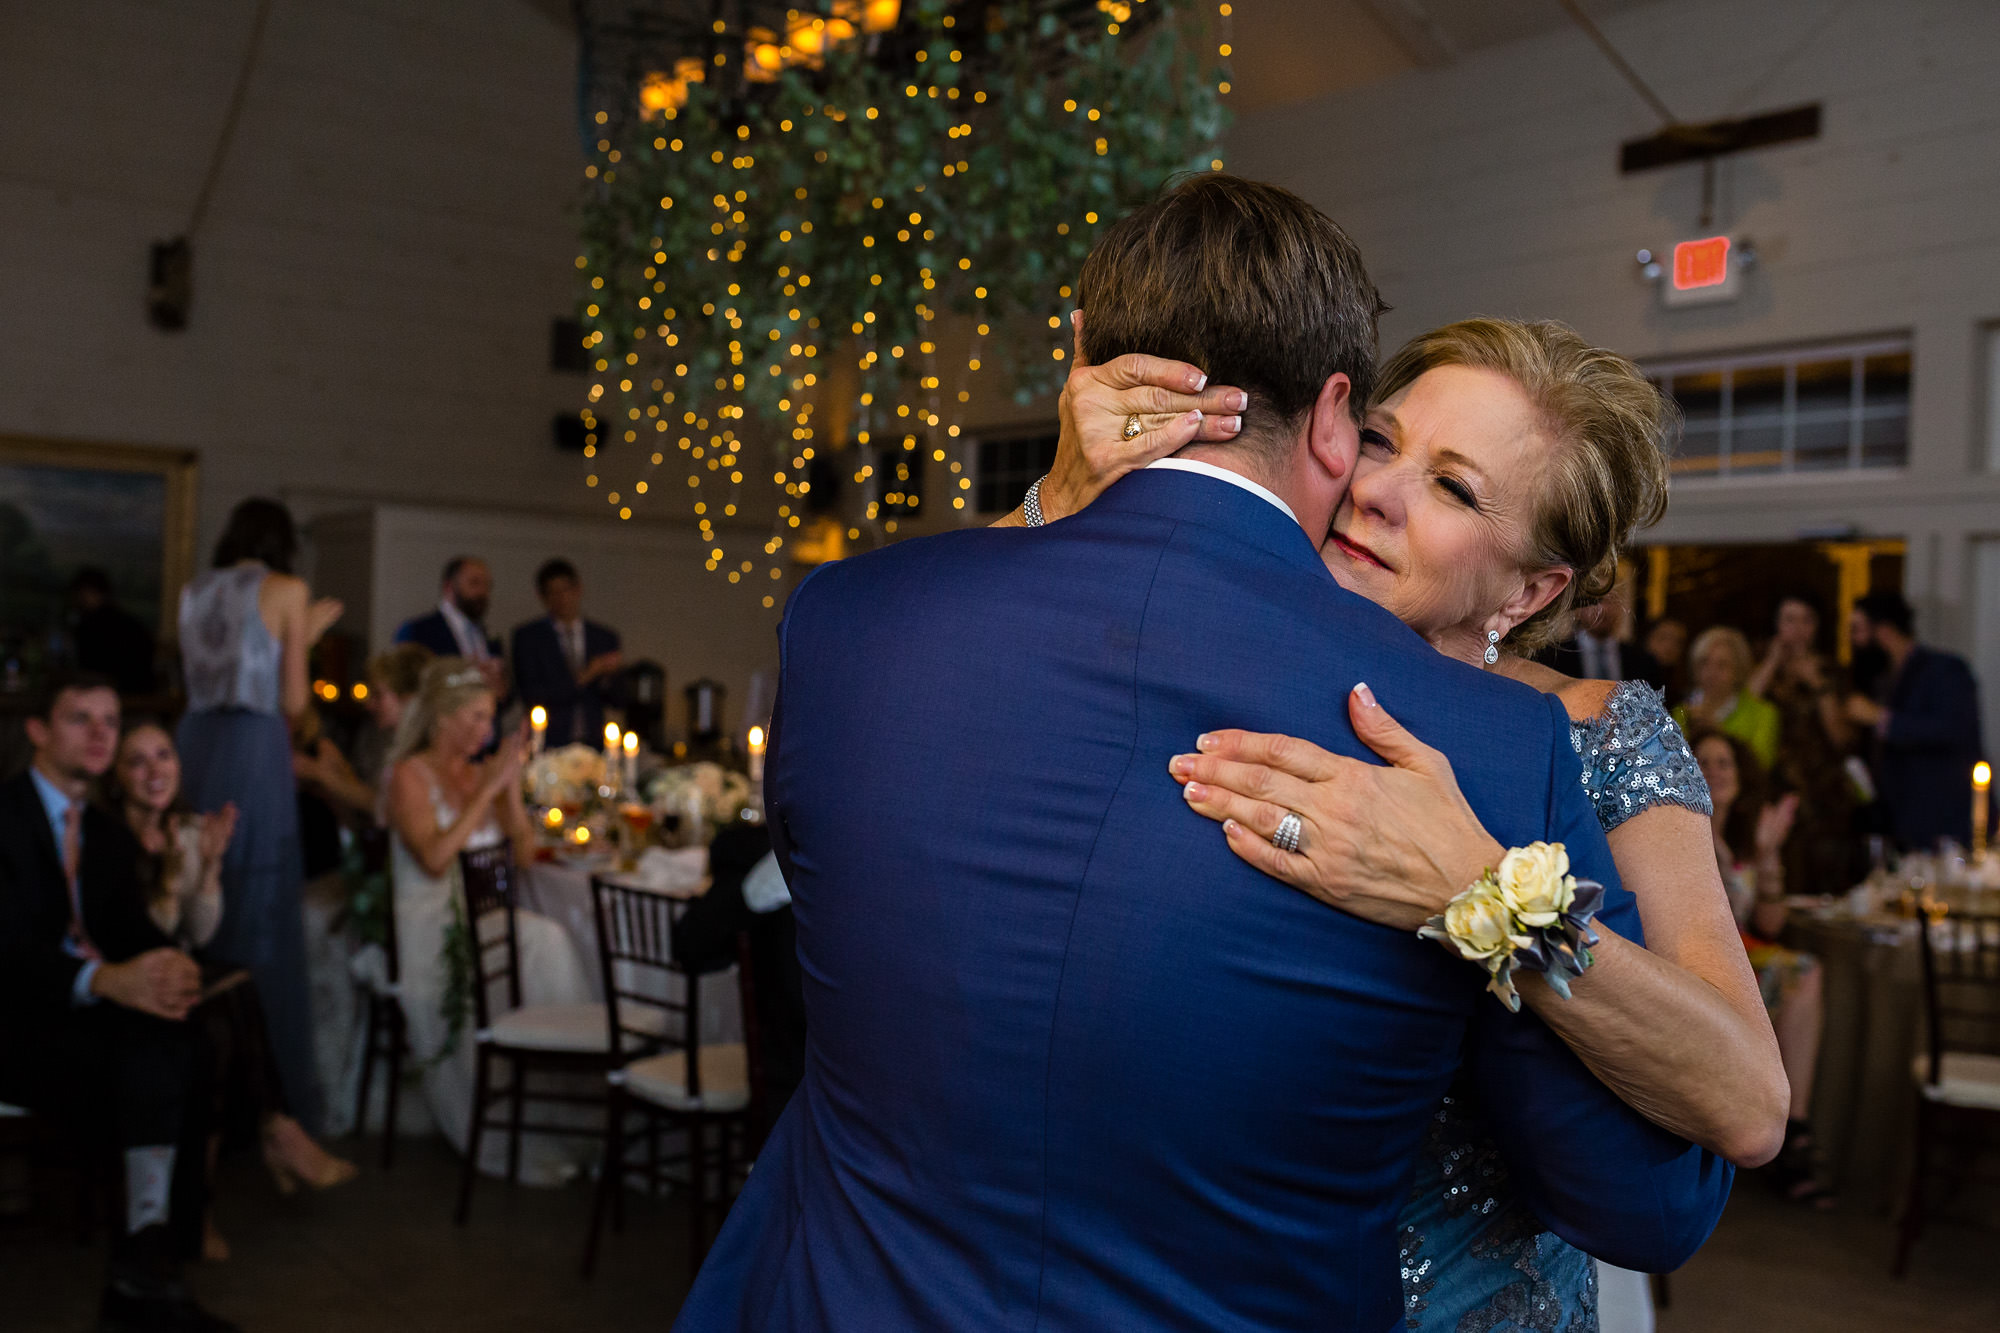 A happy dance shared with the groom and his mother at a Hidden Pond wedding.